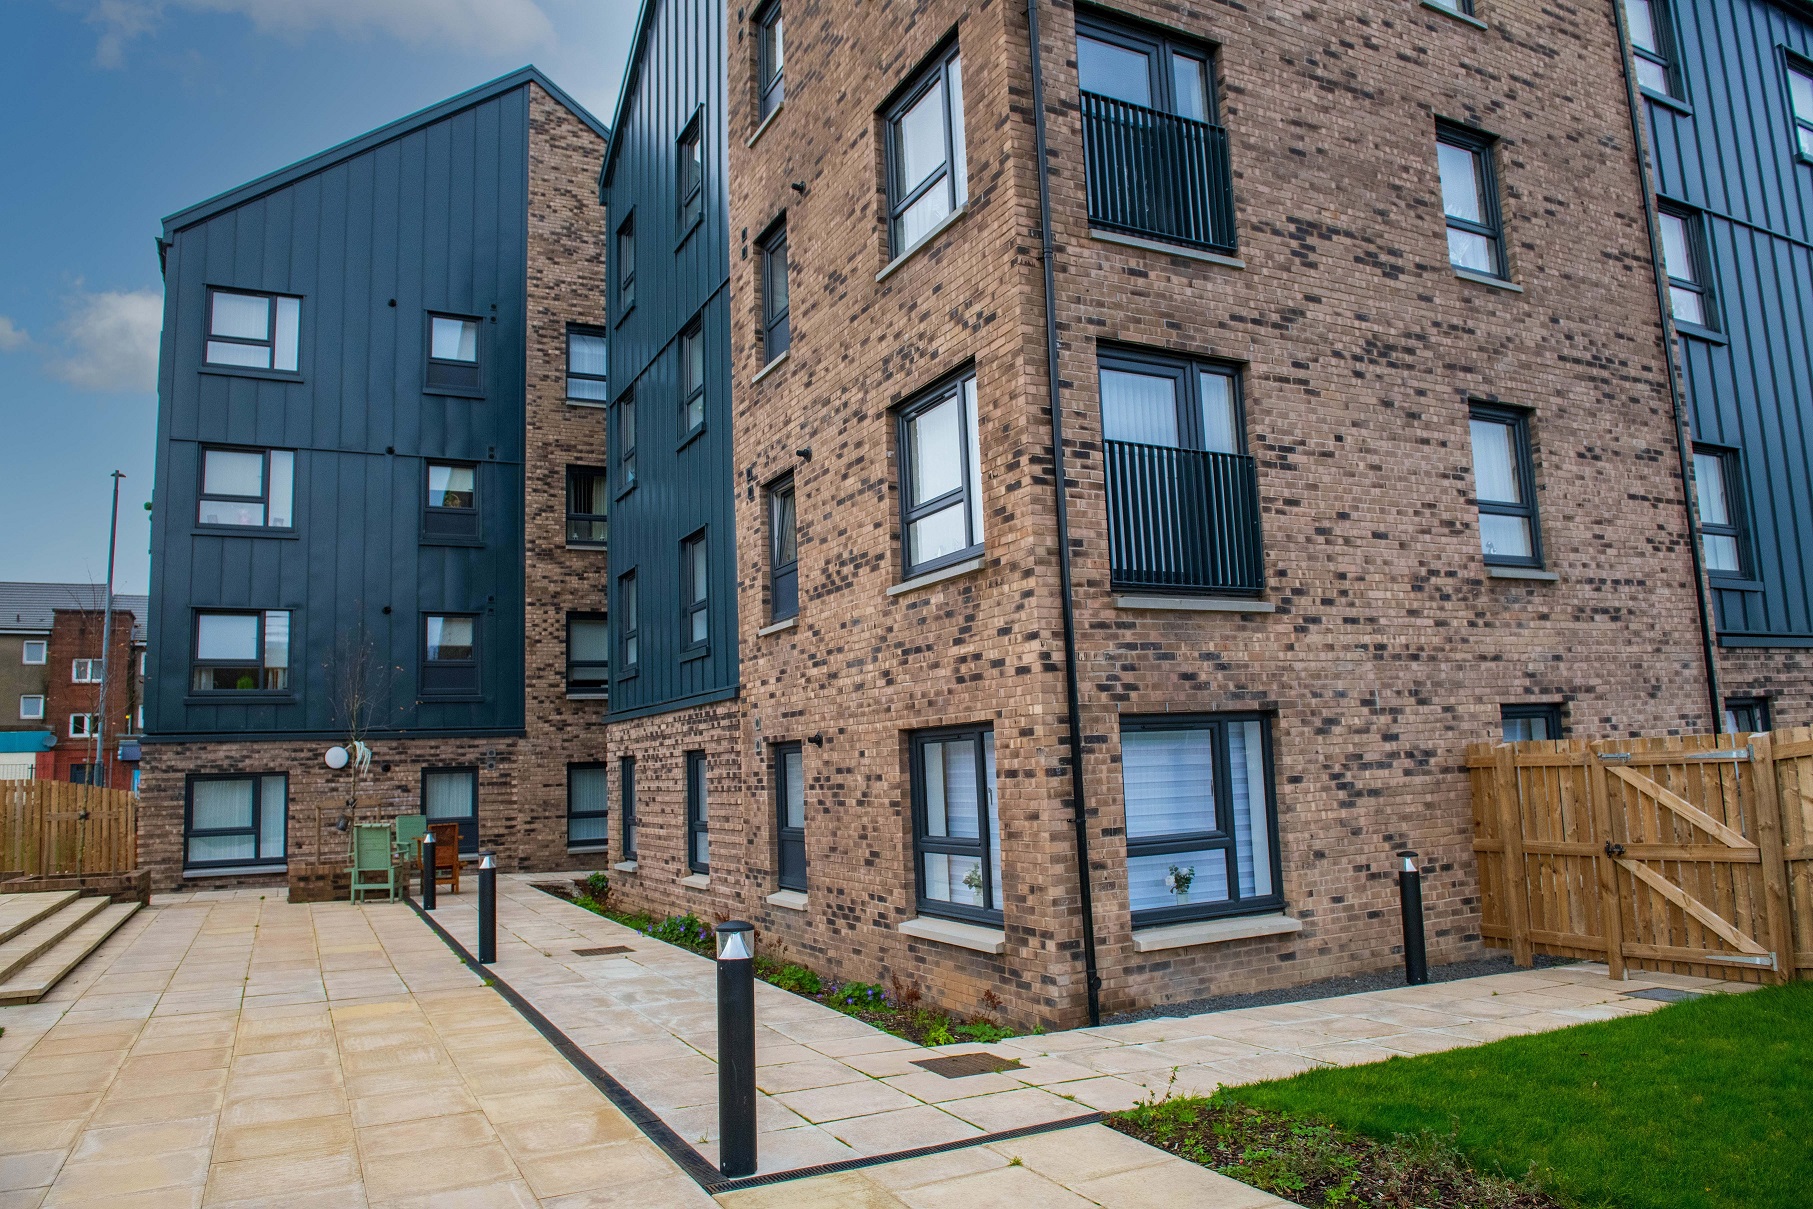 Cruden helps deliver new homes across Inverclyde